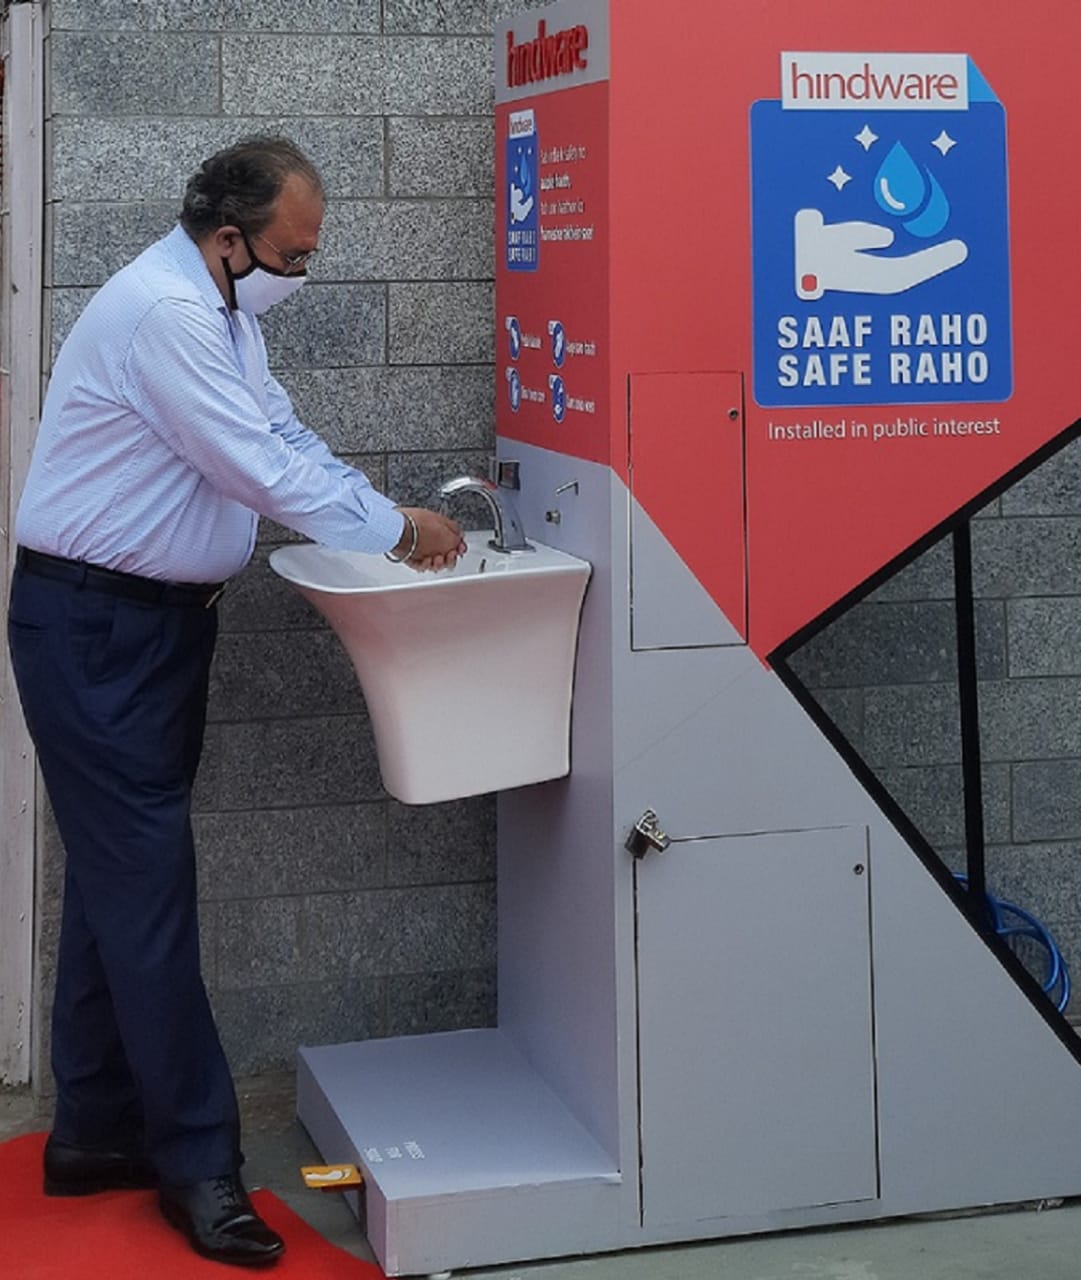 Mr. Sanjay Kalra, Chief Executive Officer, Bath Products & Tiles, Brilloca Limited inaugurates the new Hindware Contactless Handwashing System in the National Capital Region -Photo By GPN